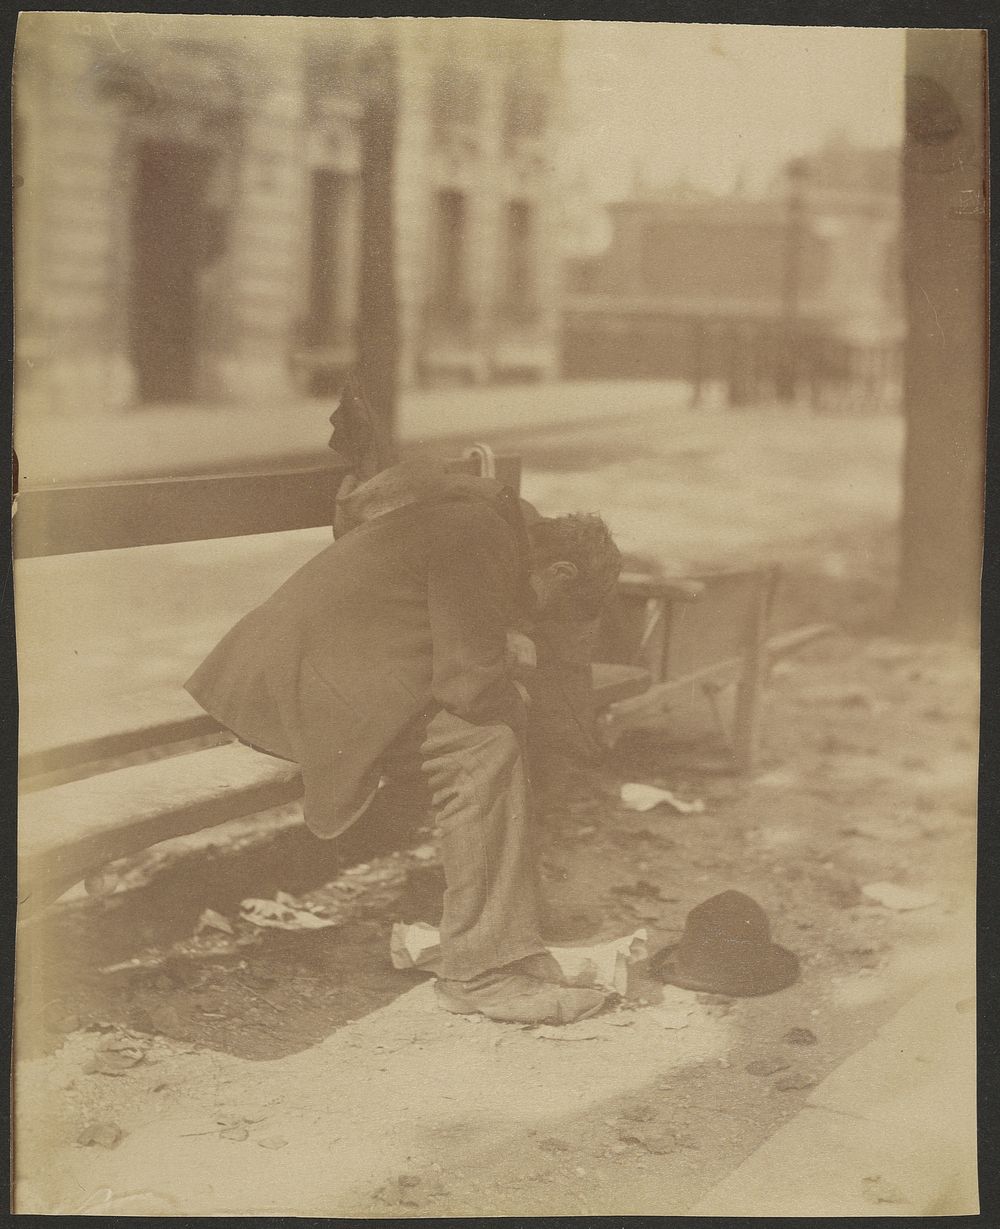 Seated Vagrant by Eugène Atget